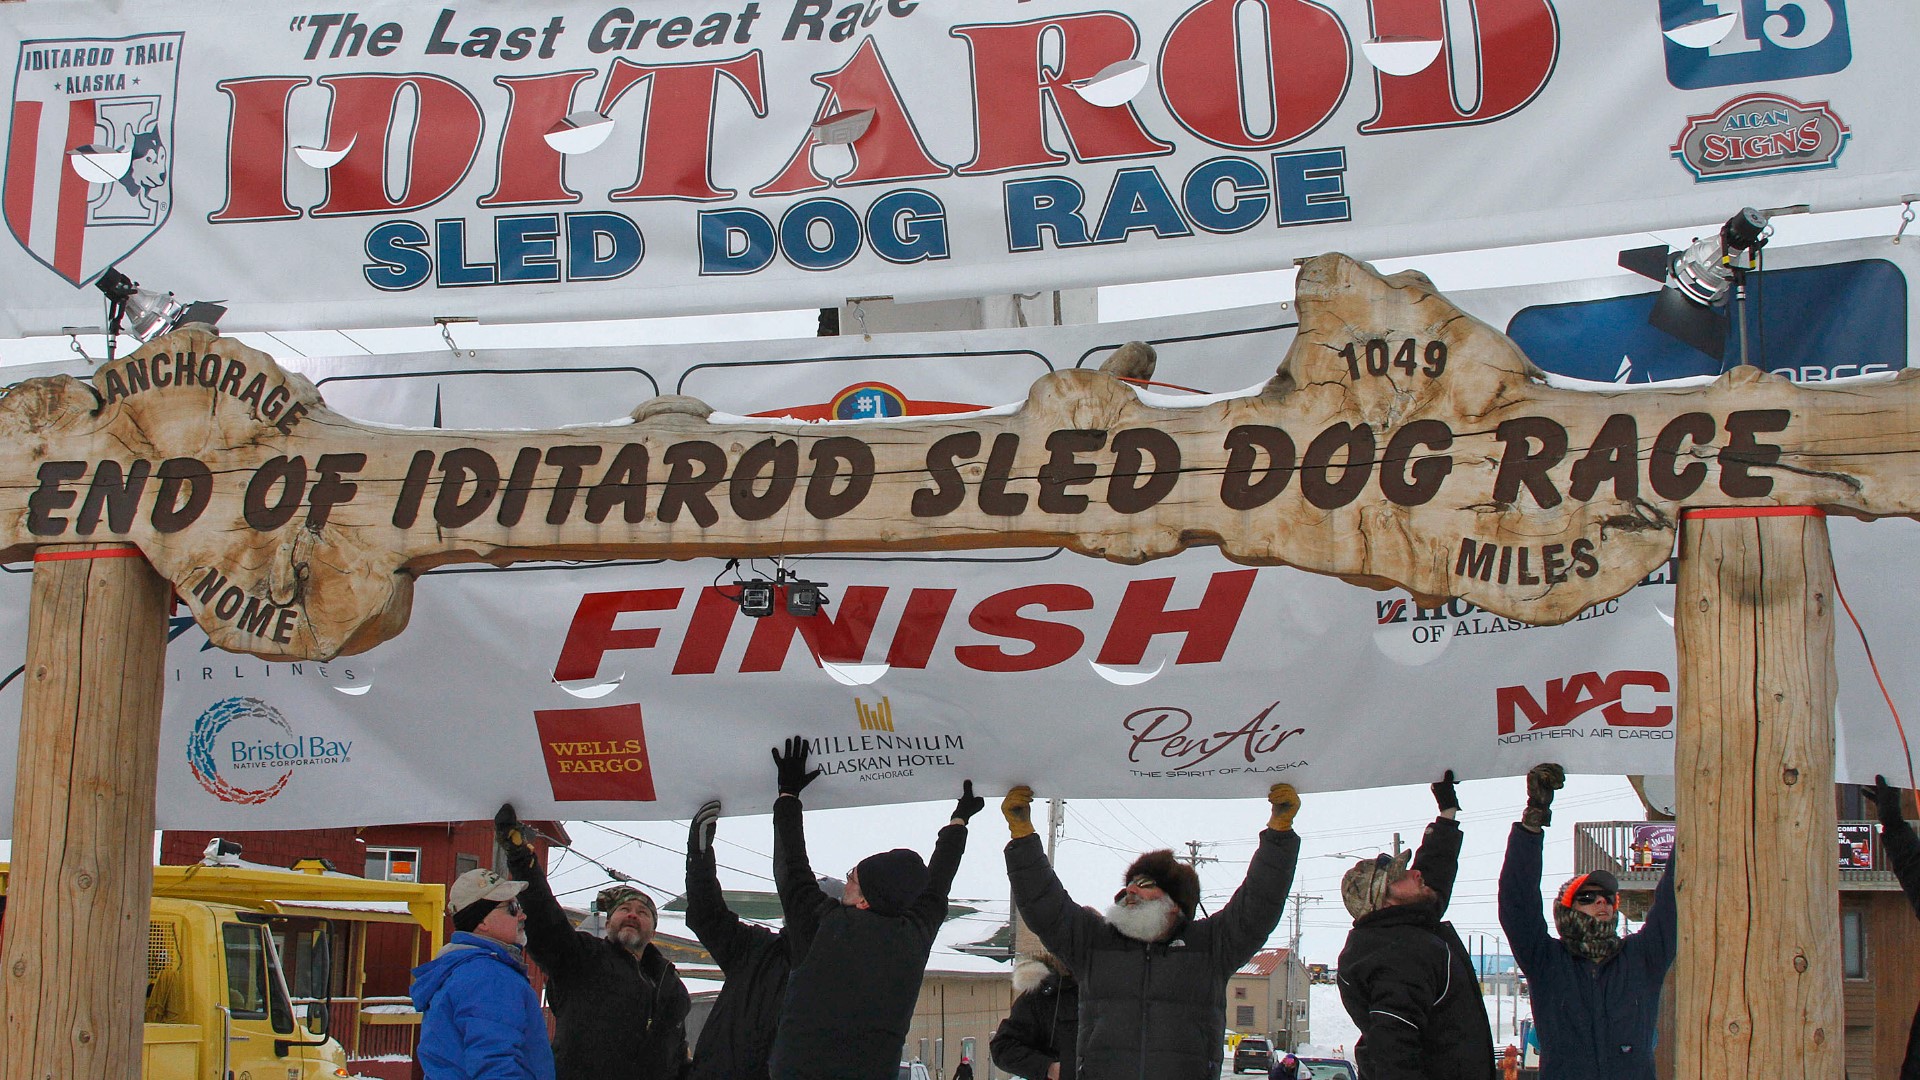 Two dogs died over the weekend during Alaska’s annual Iditarod sled dog race, marking the first deaths during the race in five years.